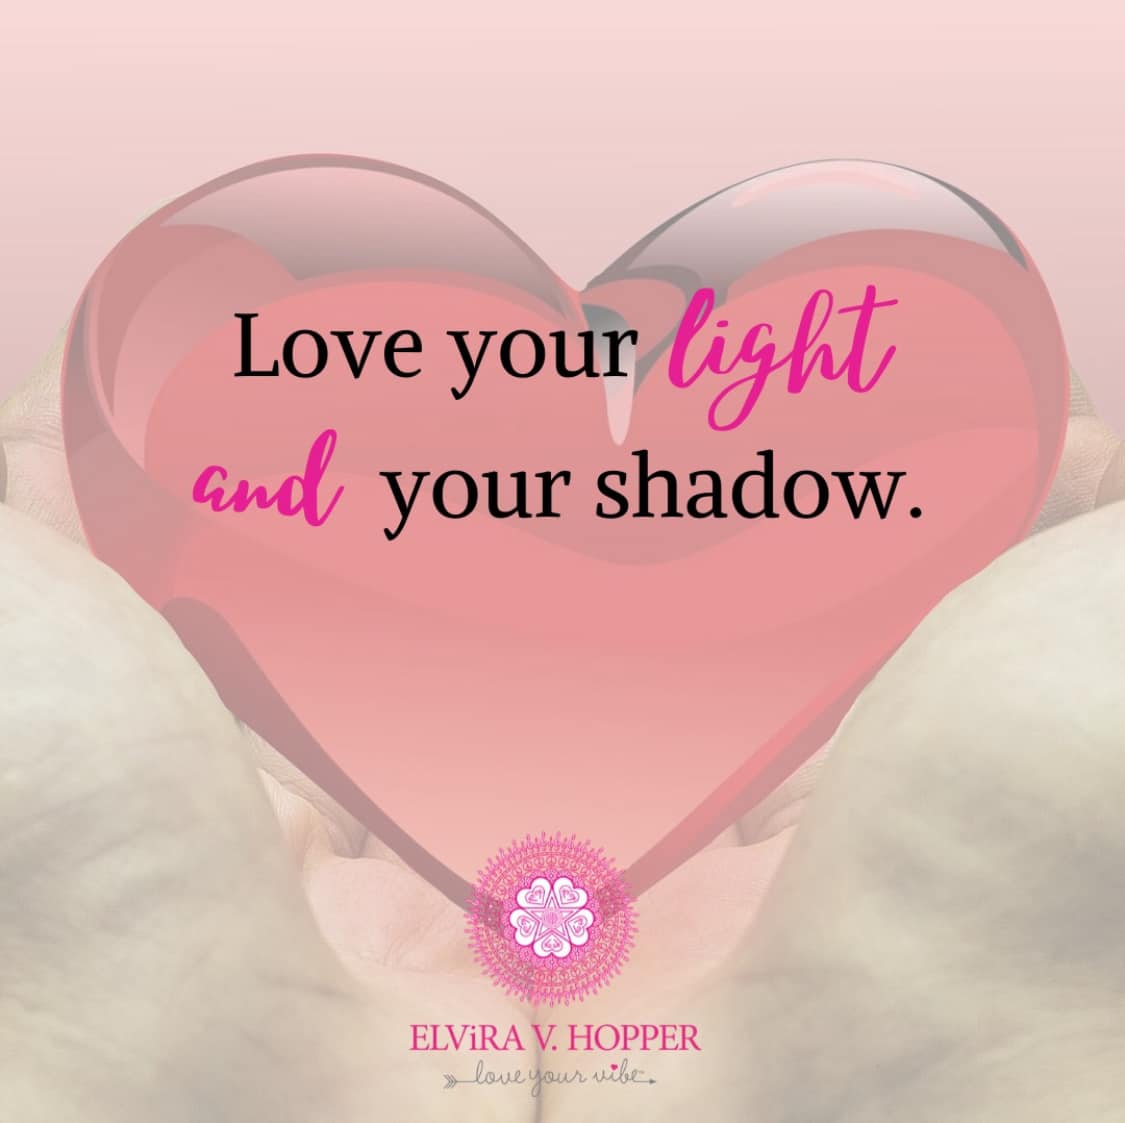 Love Your Light and Your Shadow, meme by Elvira V. Hopper, The Love Your Vibe Transformation